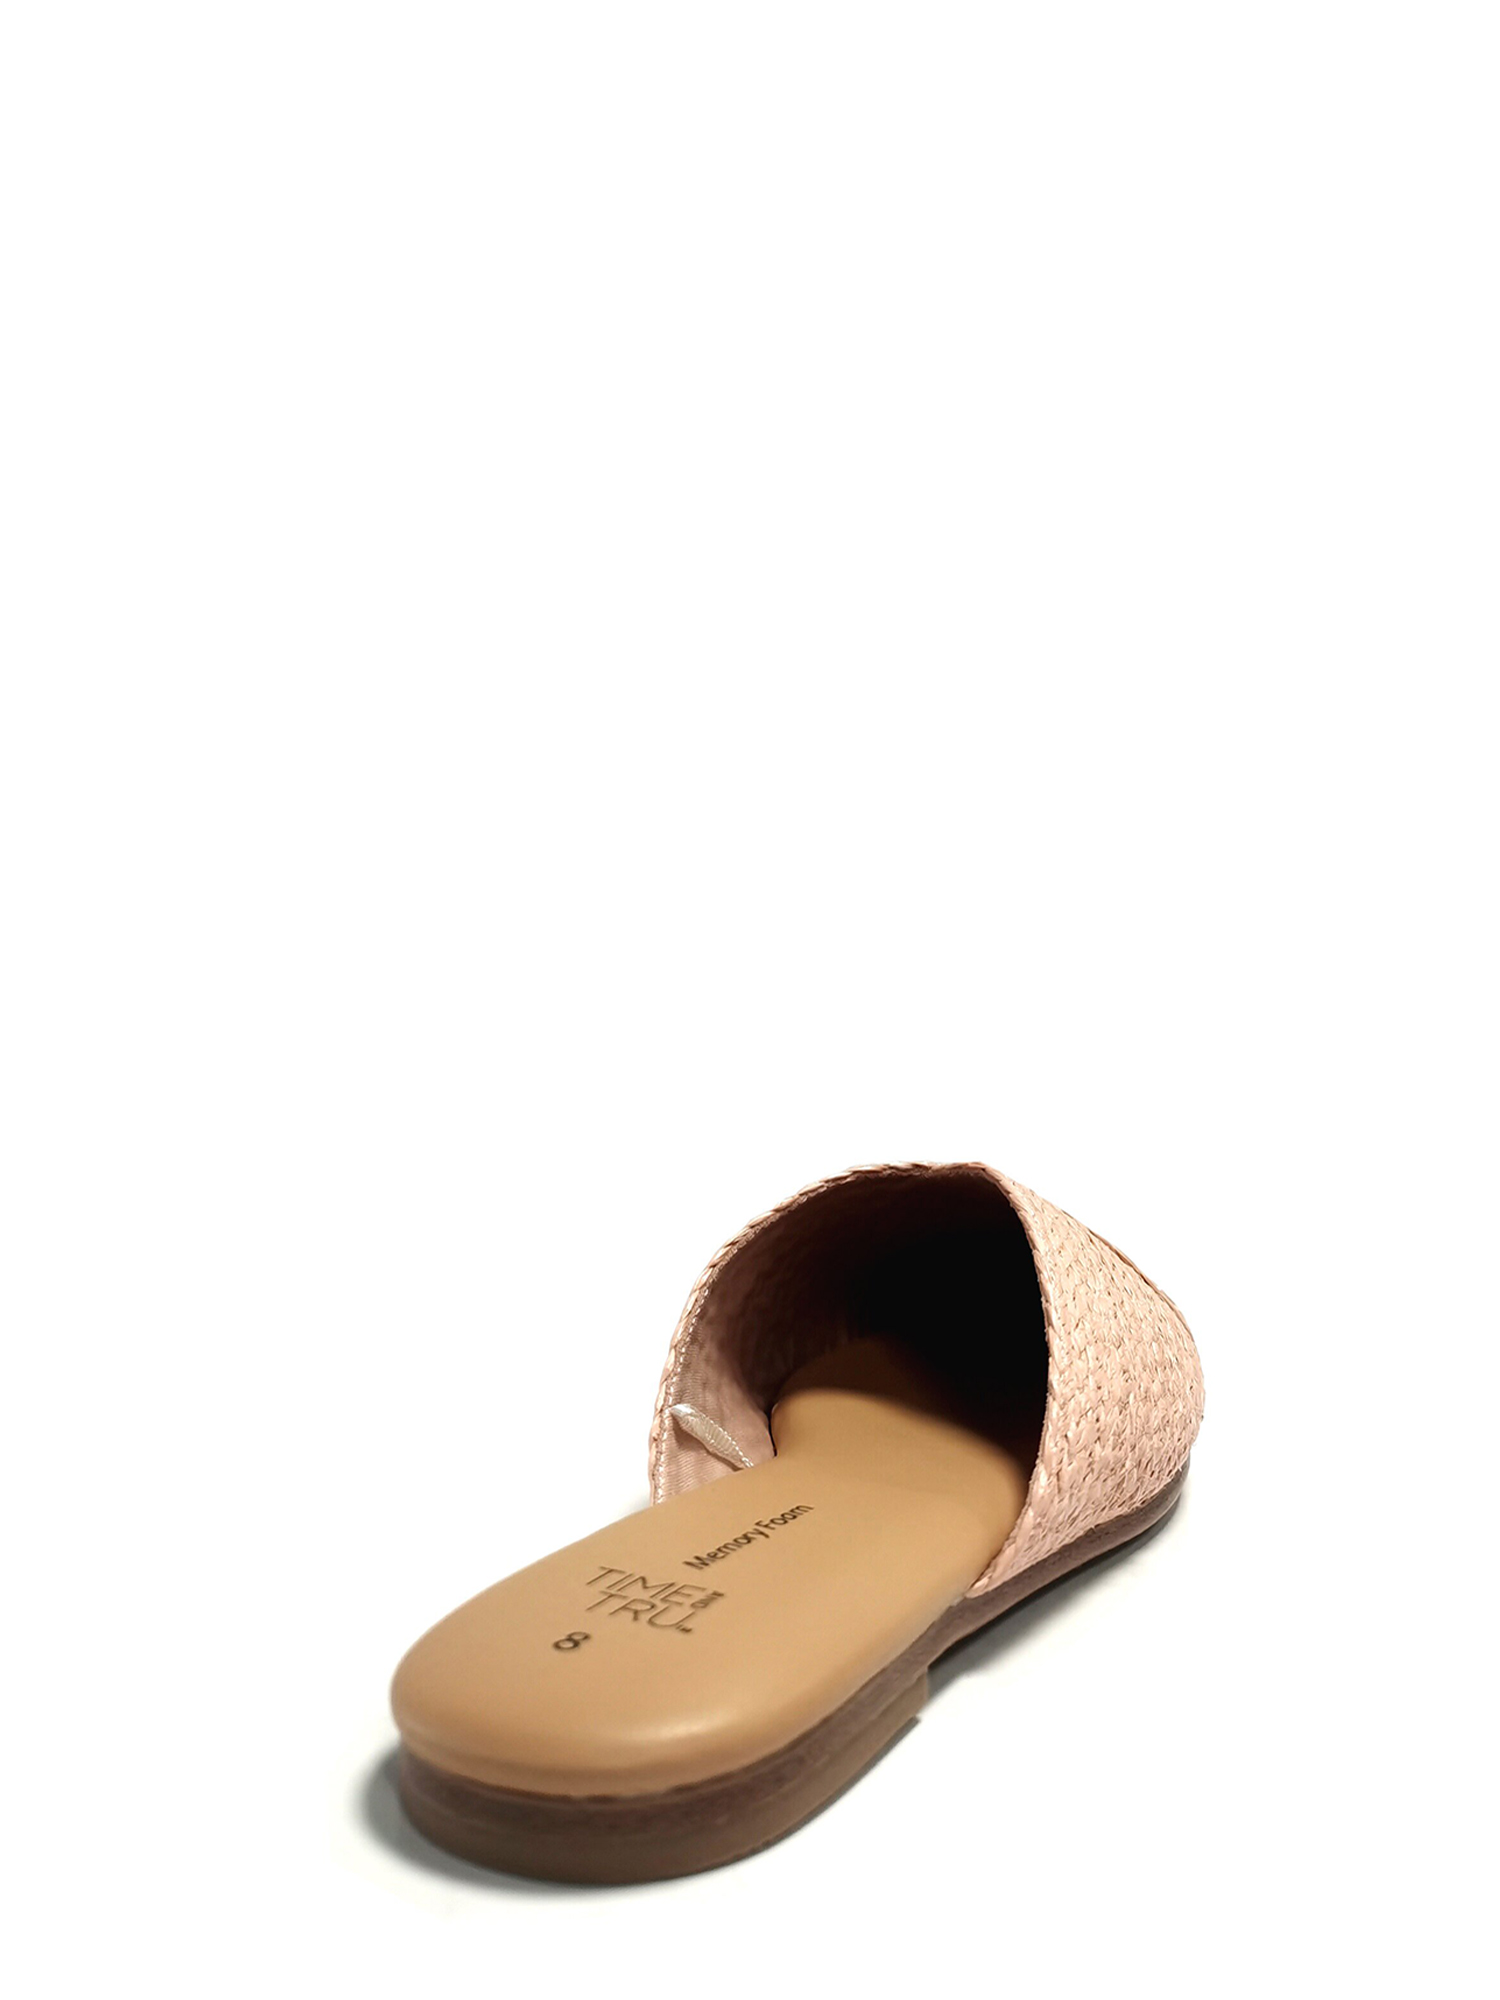 Time And Tru Women's Raffia Mule Shoes - image 3 of 6